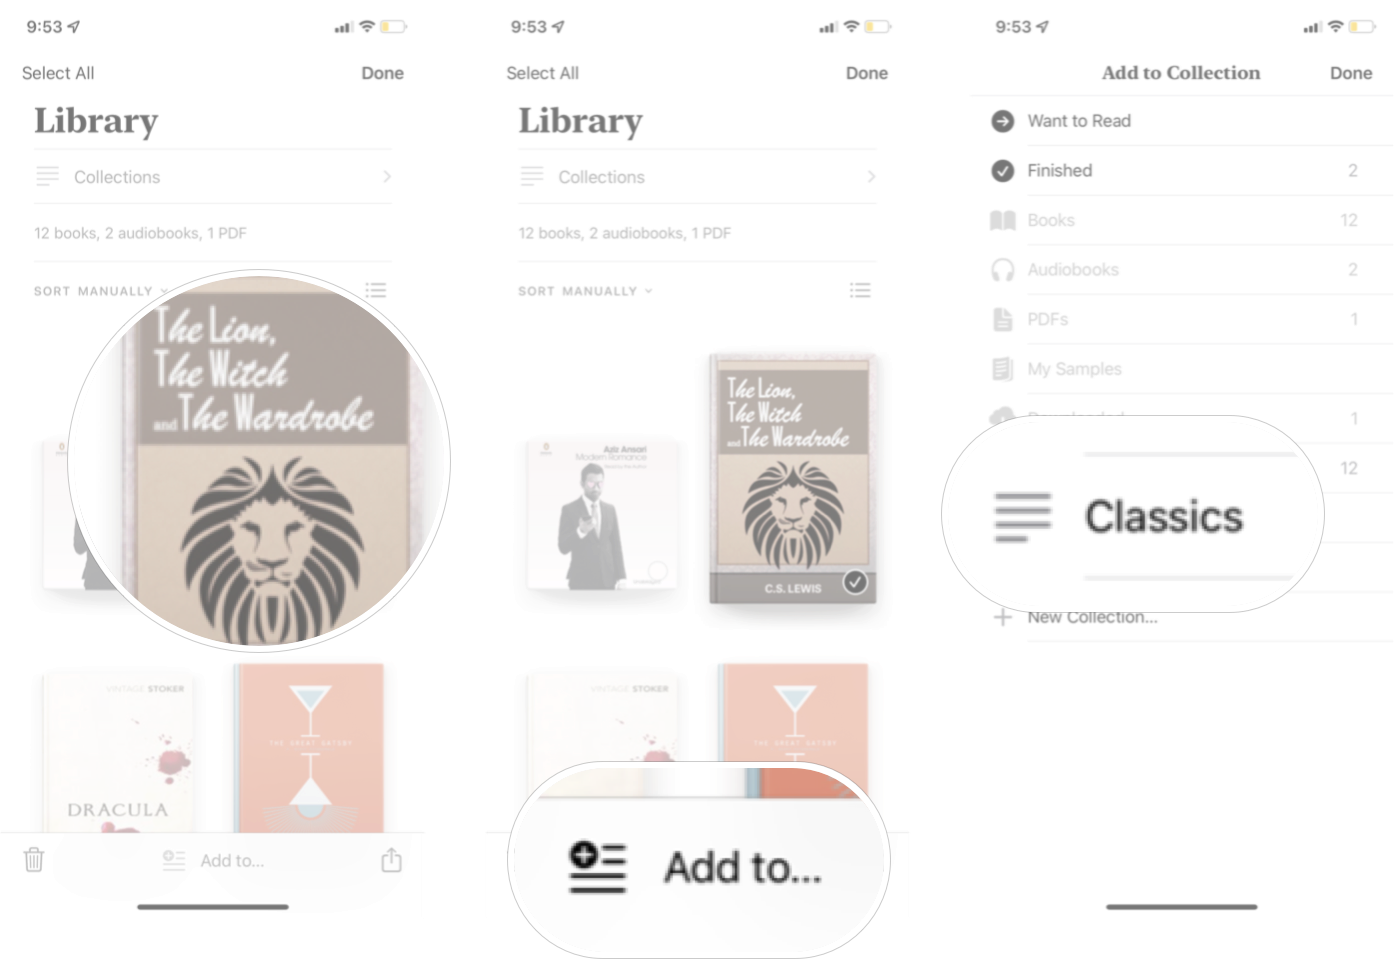 Adding Books To Collections In iOS 15: Tap the books you want, tap add to, and then ta the collection you want.